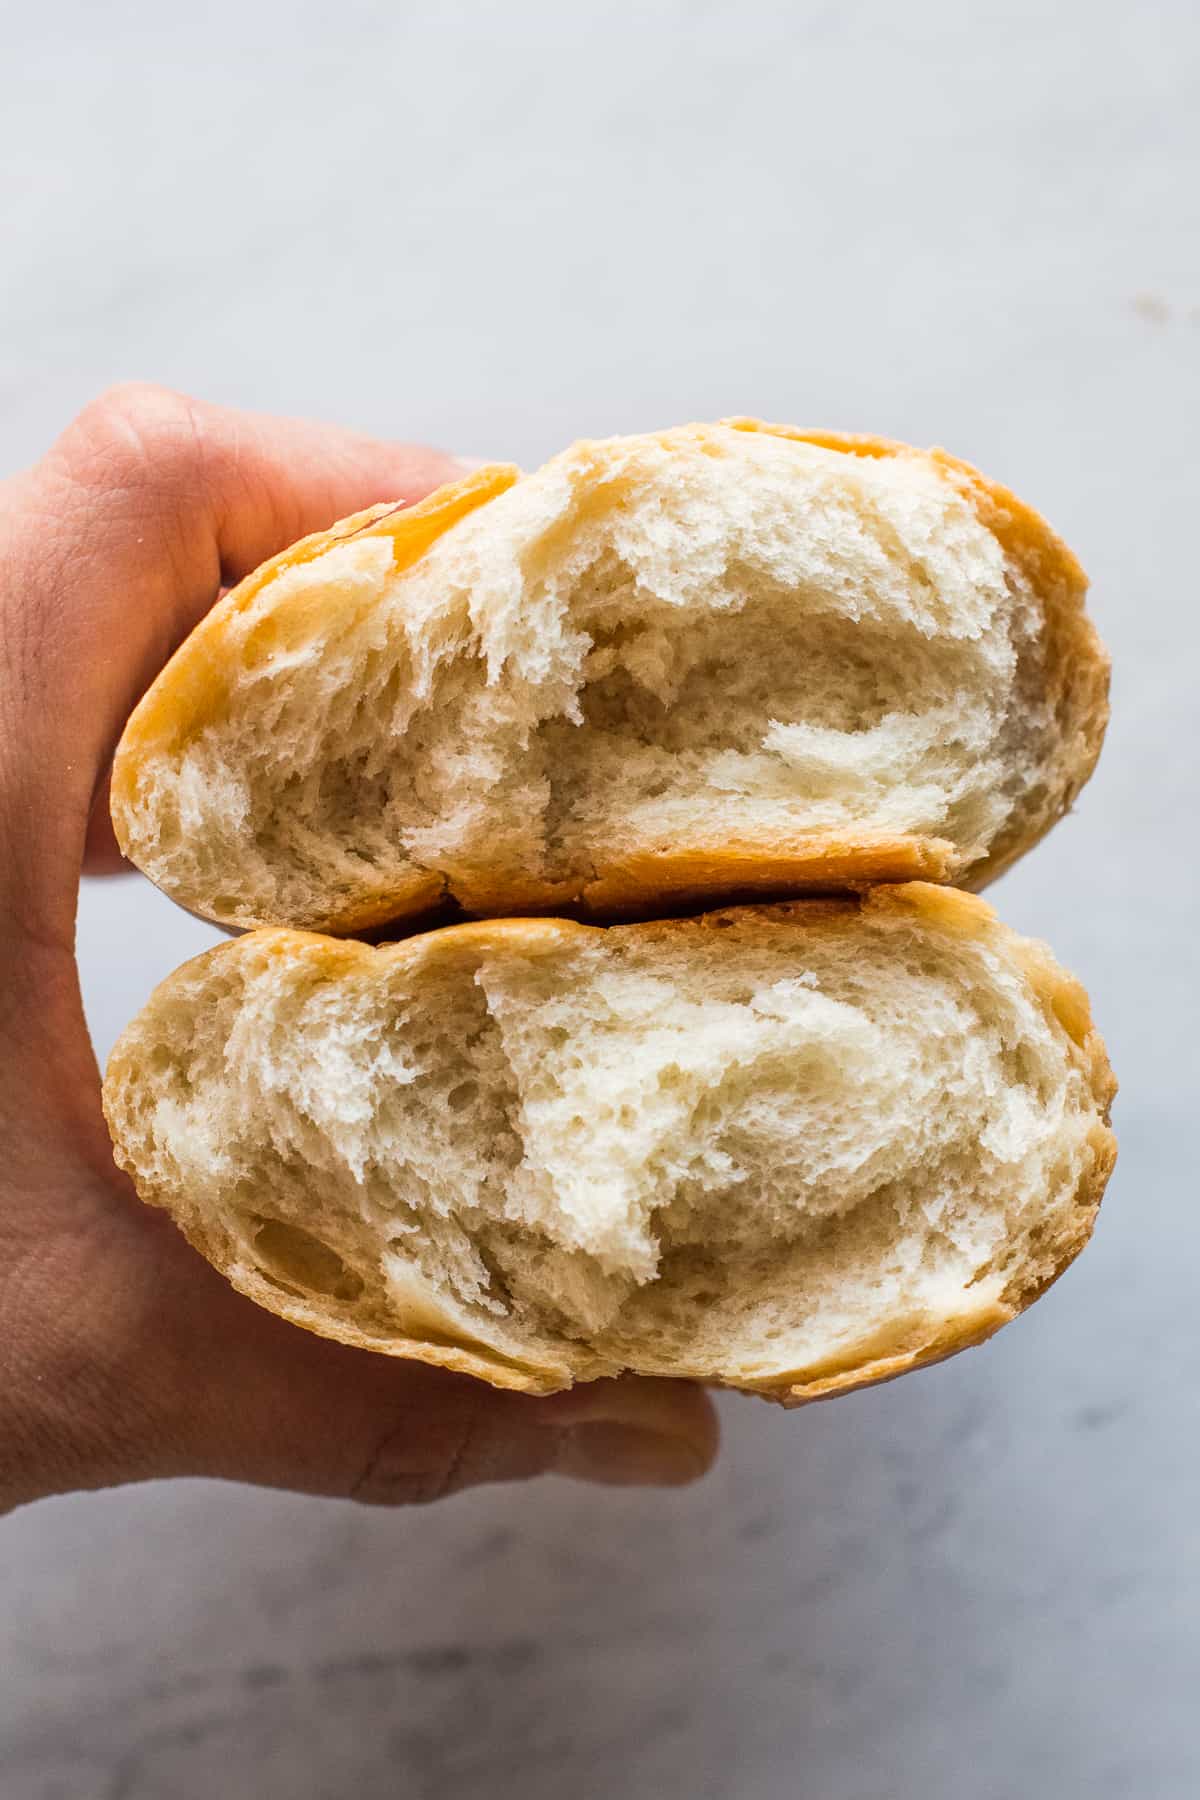 A bolillo bread cut in half to show the soft white bread inside in contrast to the crispy golden brown crust on the outside.